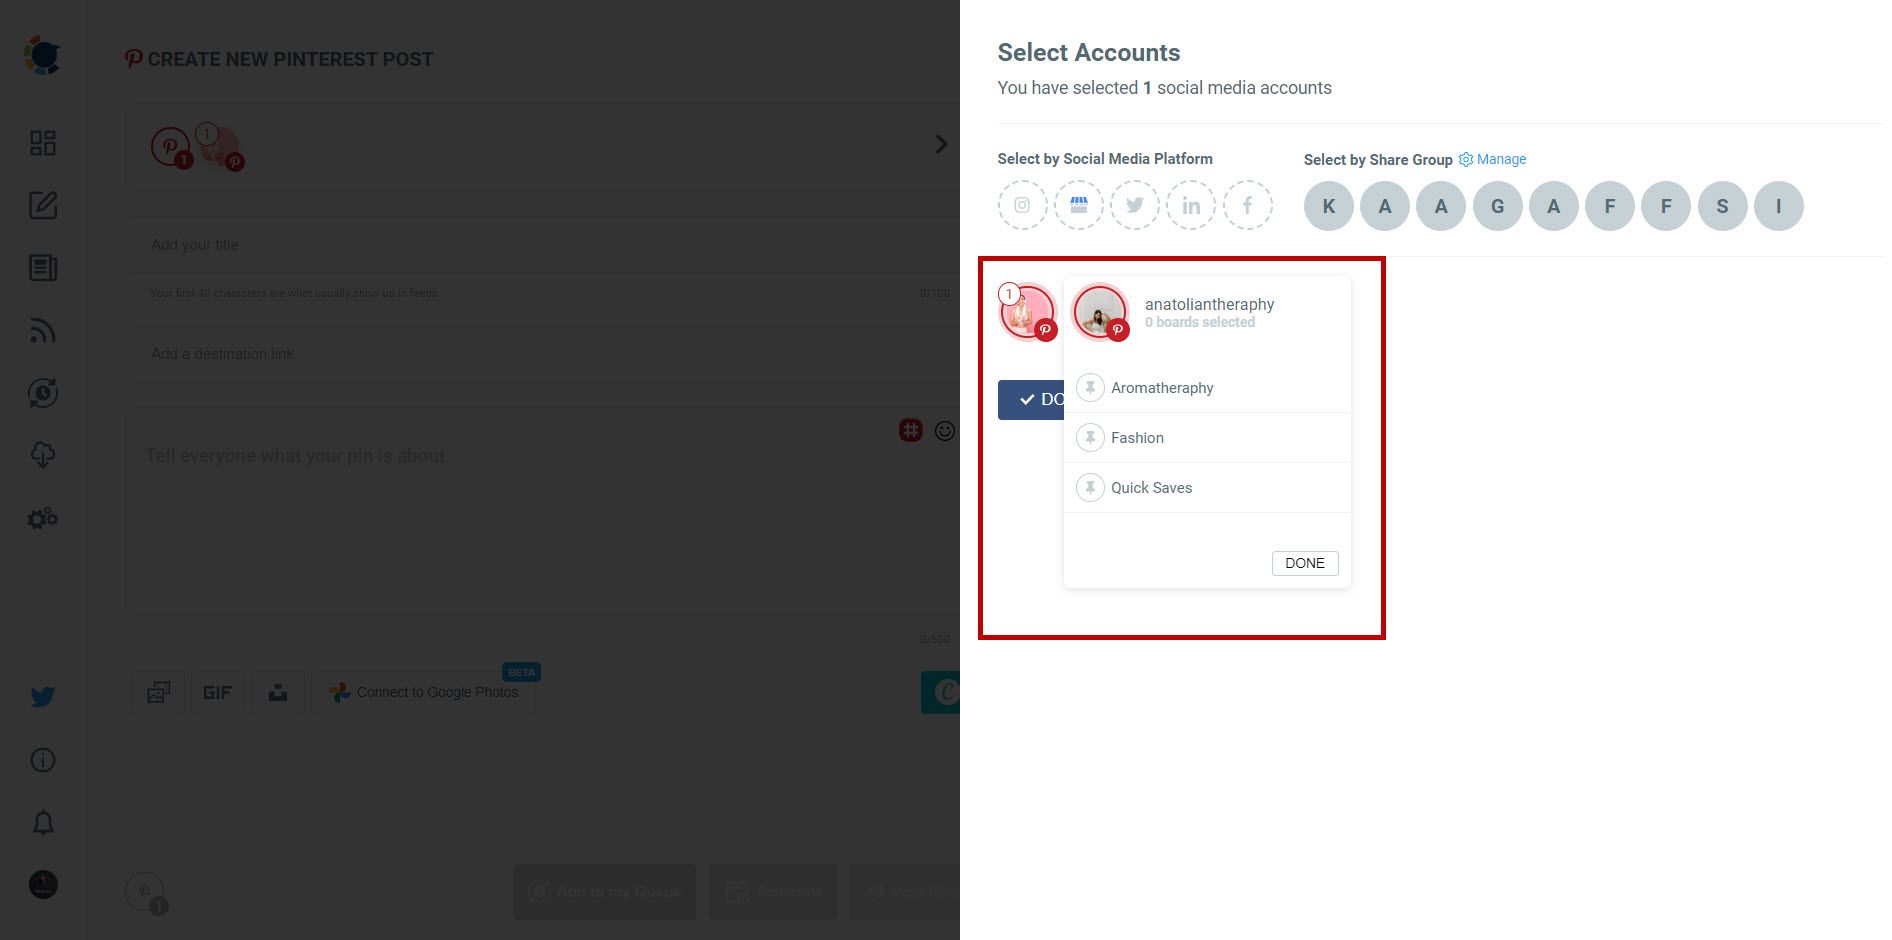 You can manage multiple social media accounts on Circleboom Publish.